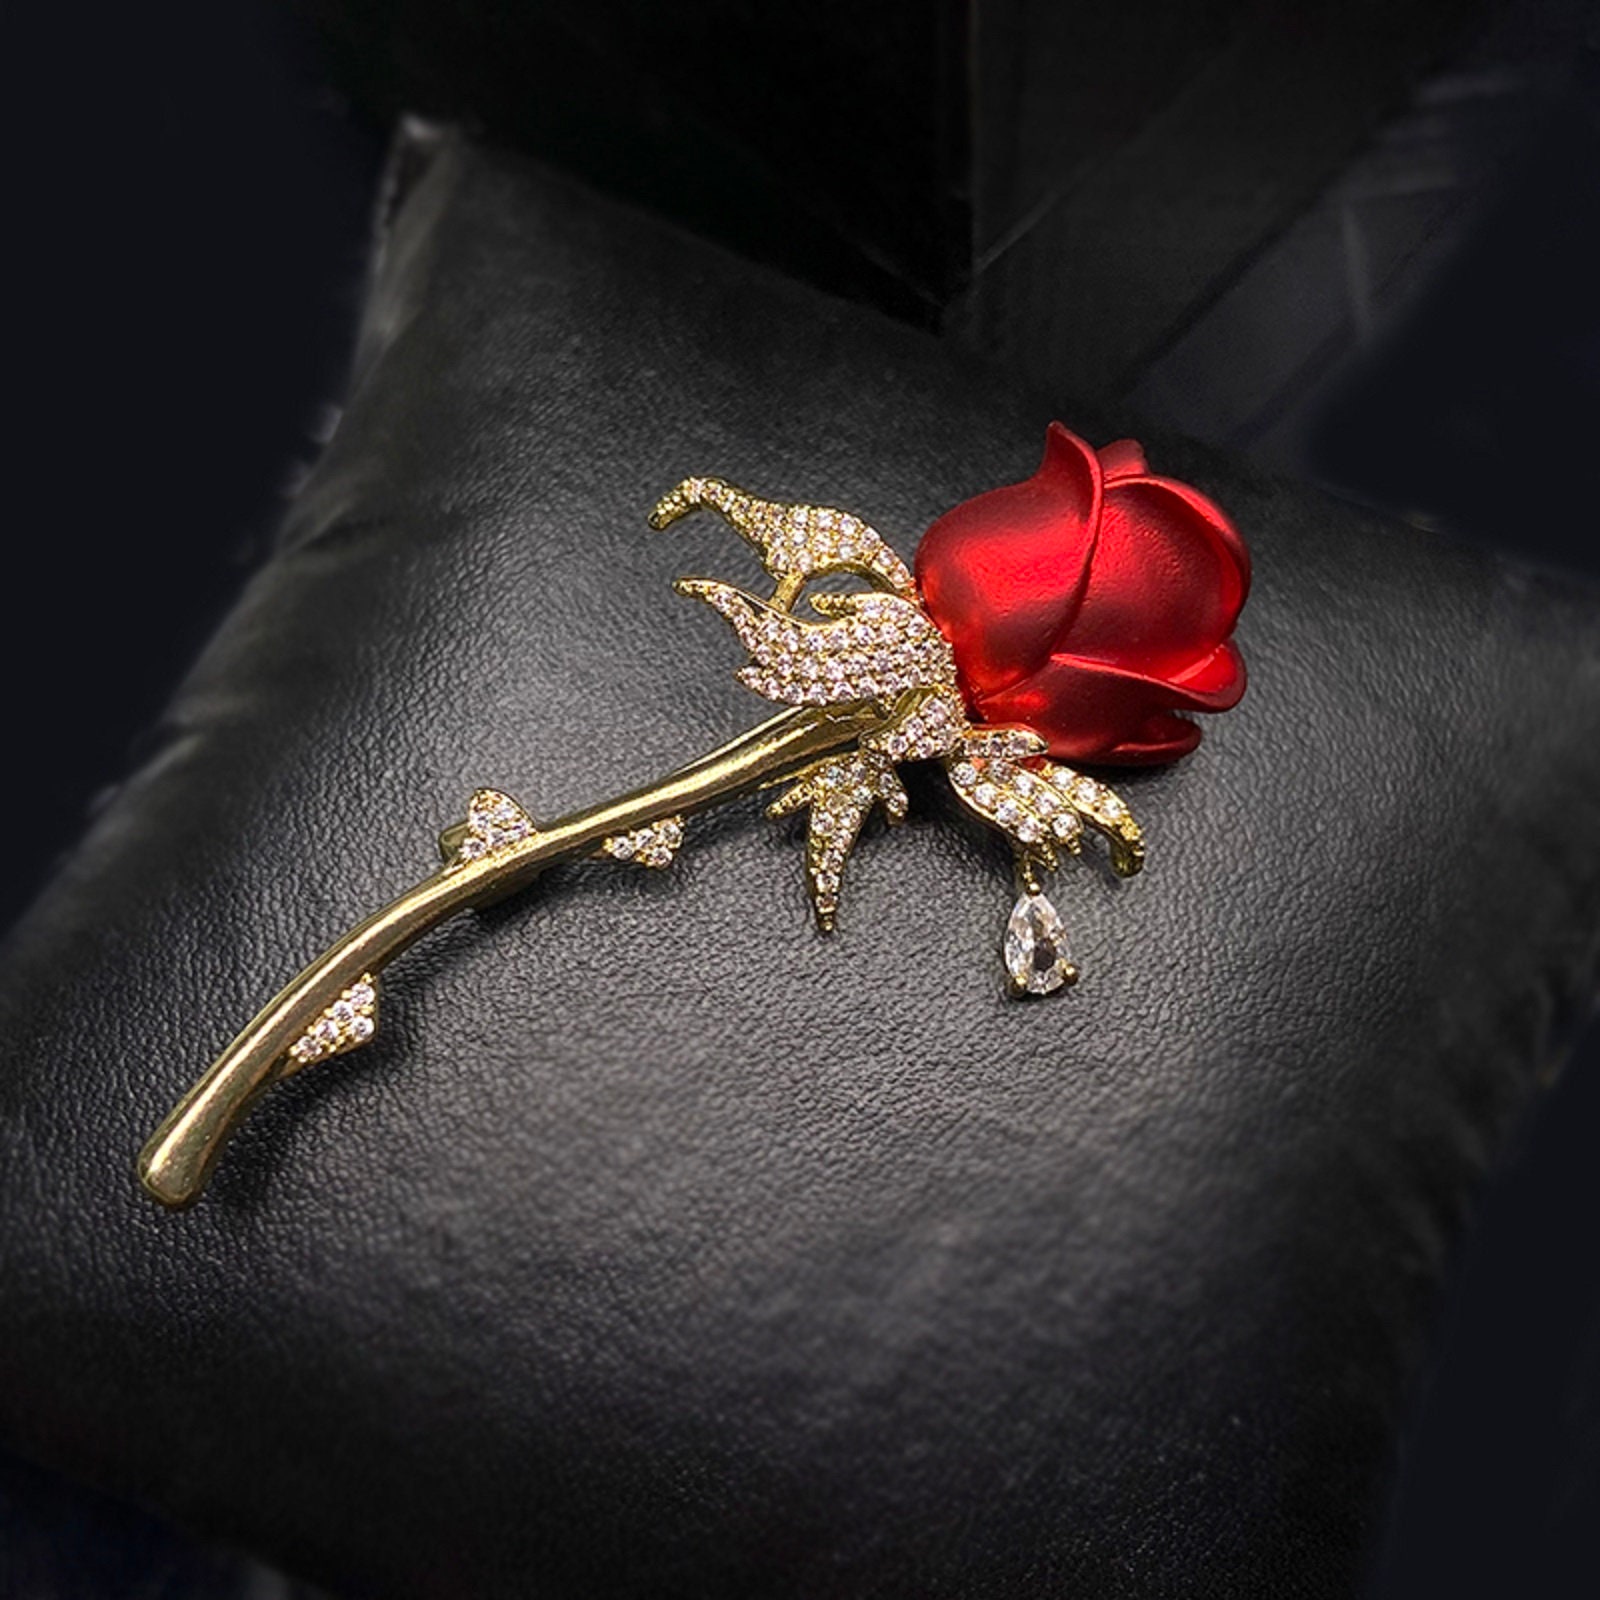 Fashion Women 3D Red Rose Flower Brooch Pin Charm Lady Costume Jewellery  Gifts